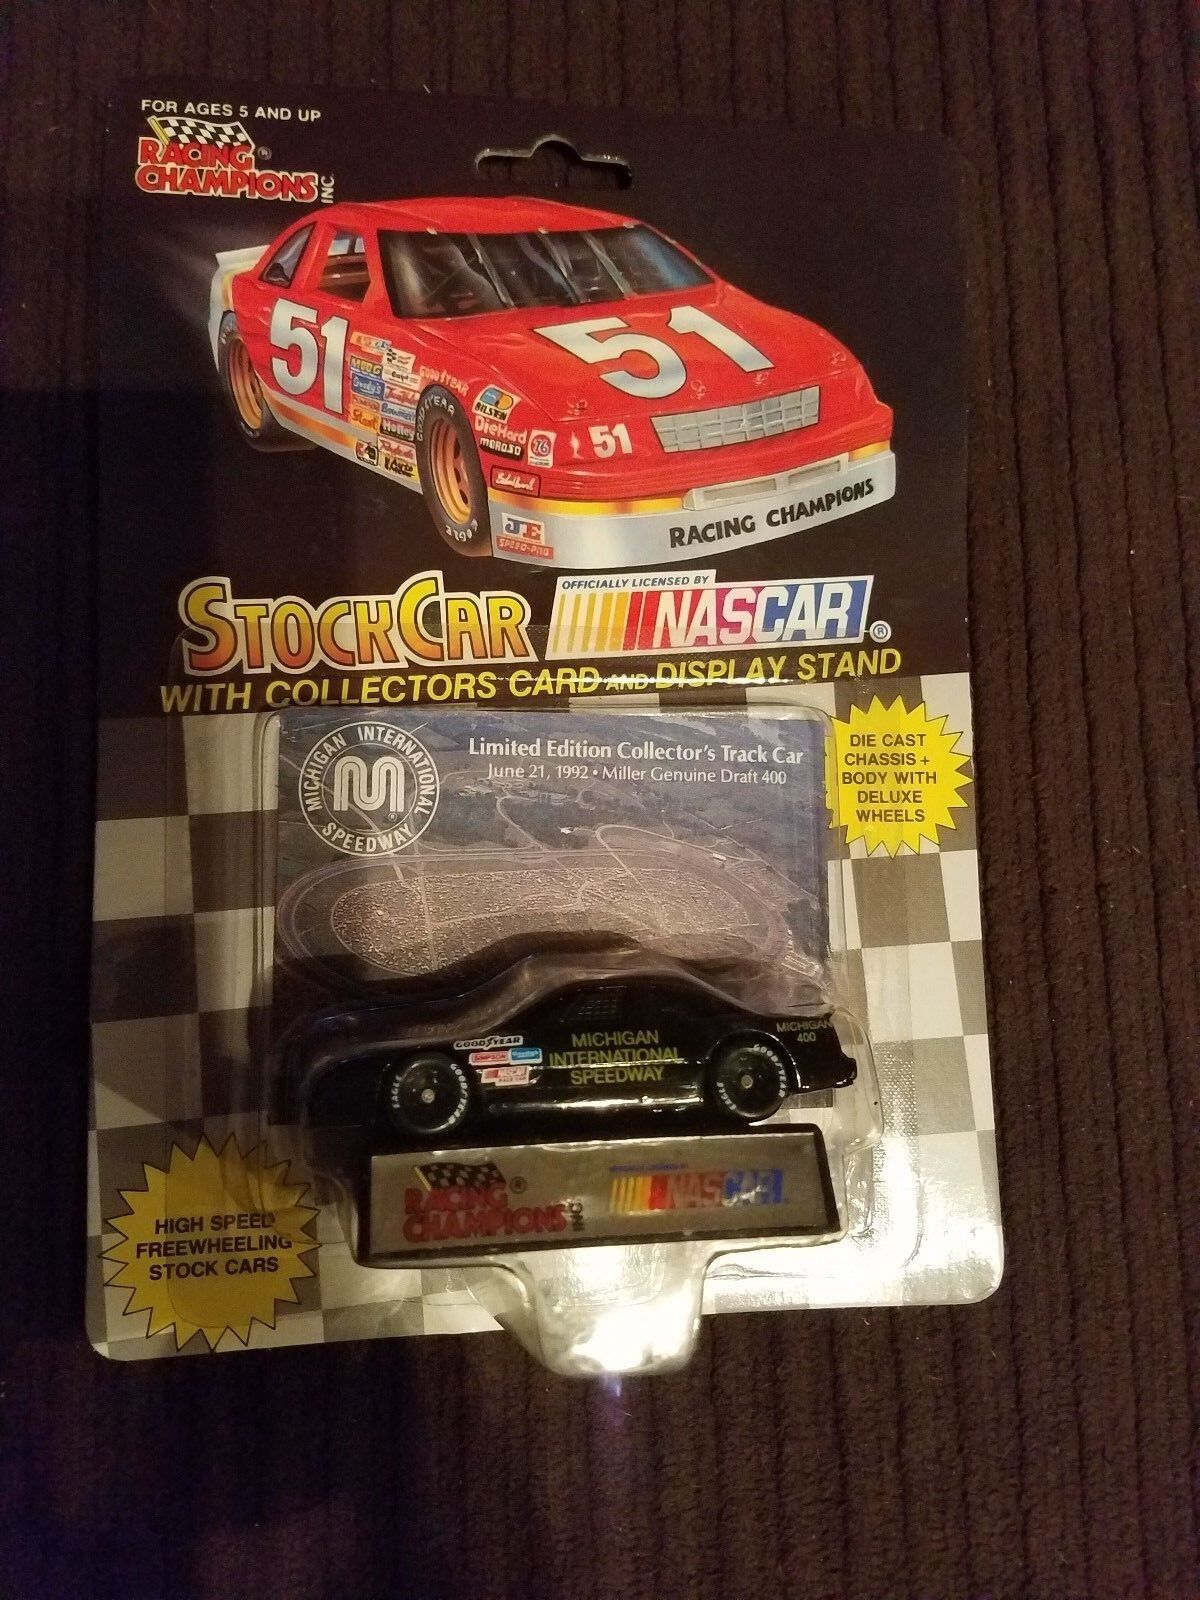 1992 Racing Champions Stock Car Michigan Speedway with Collectors Card